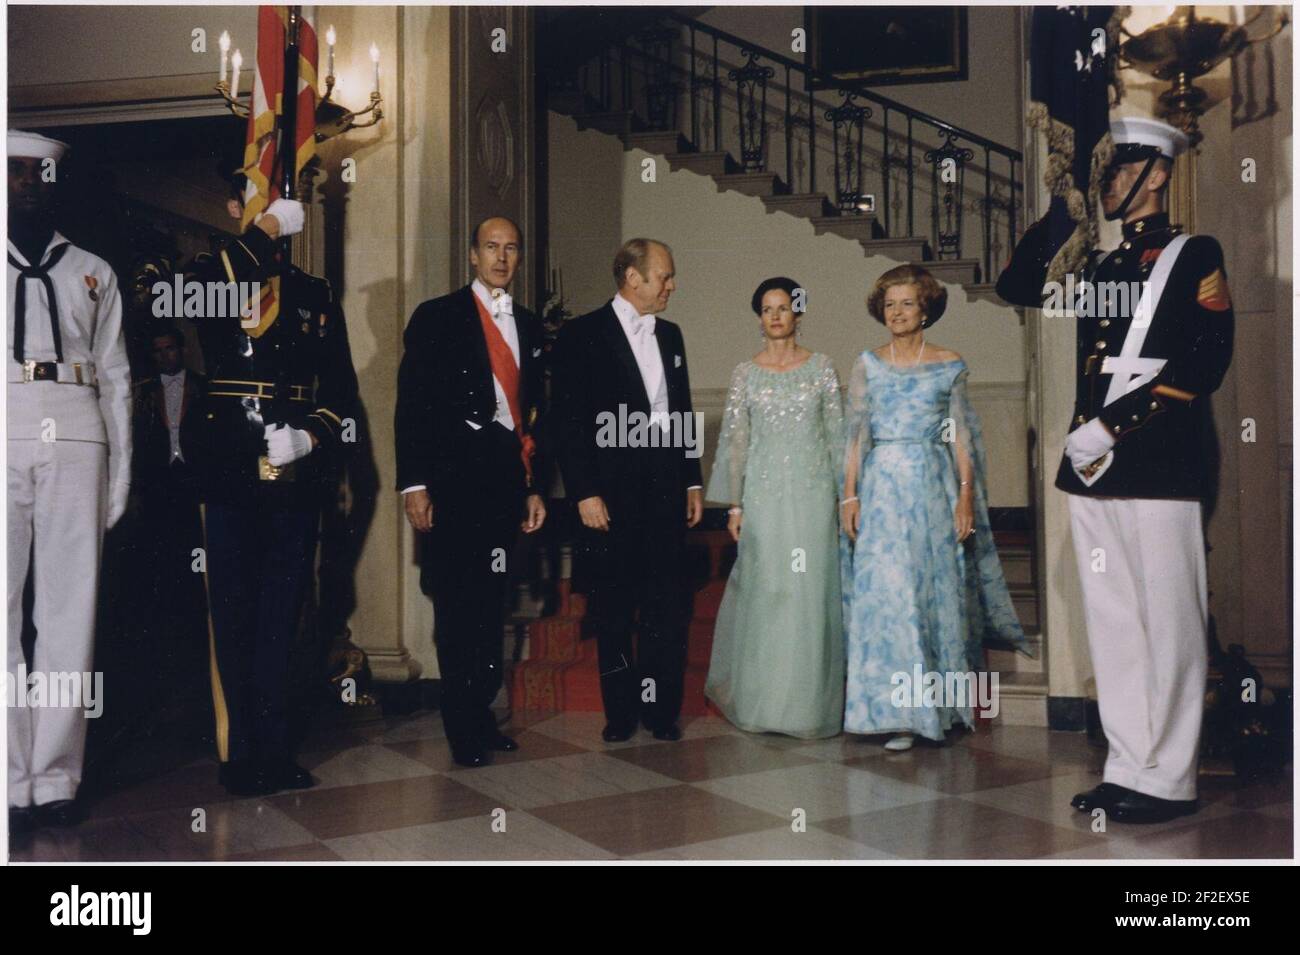 President Gerald Ford, First Lady Betty Ford, President Valéry Giscard d'Estaing, and Anne-Aymone Giscard d'Estaing. Stock Photo